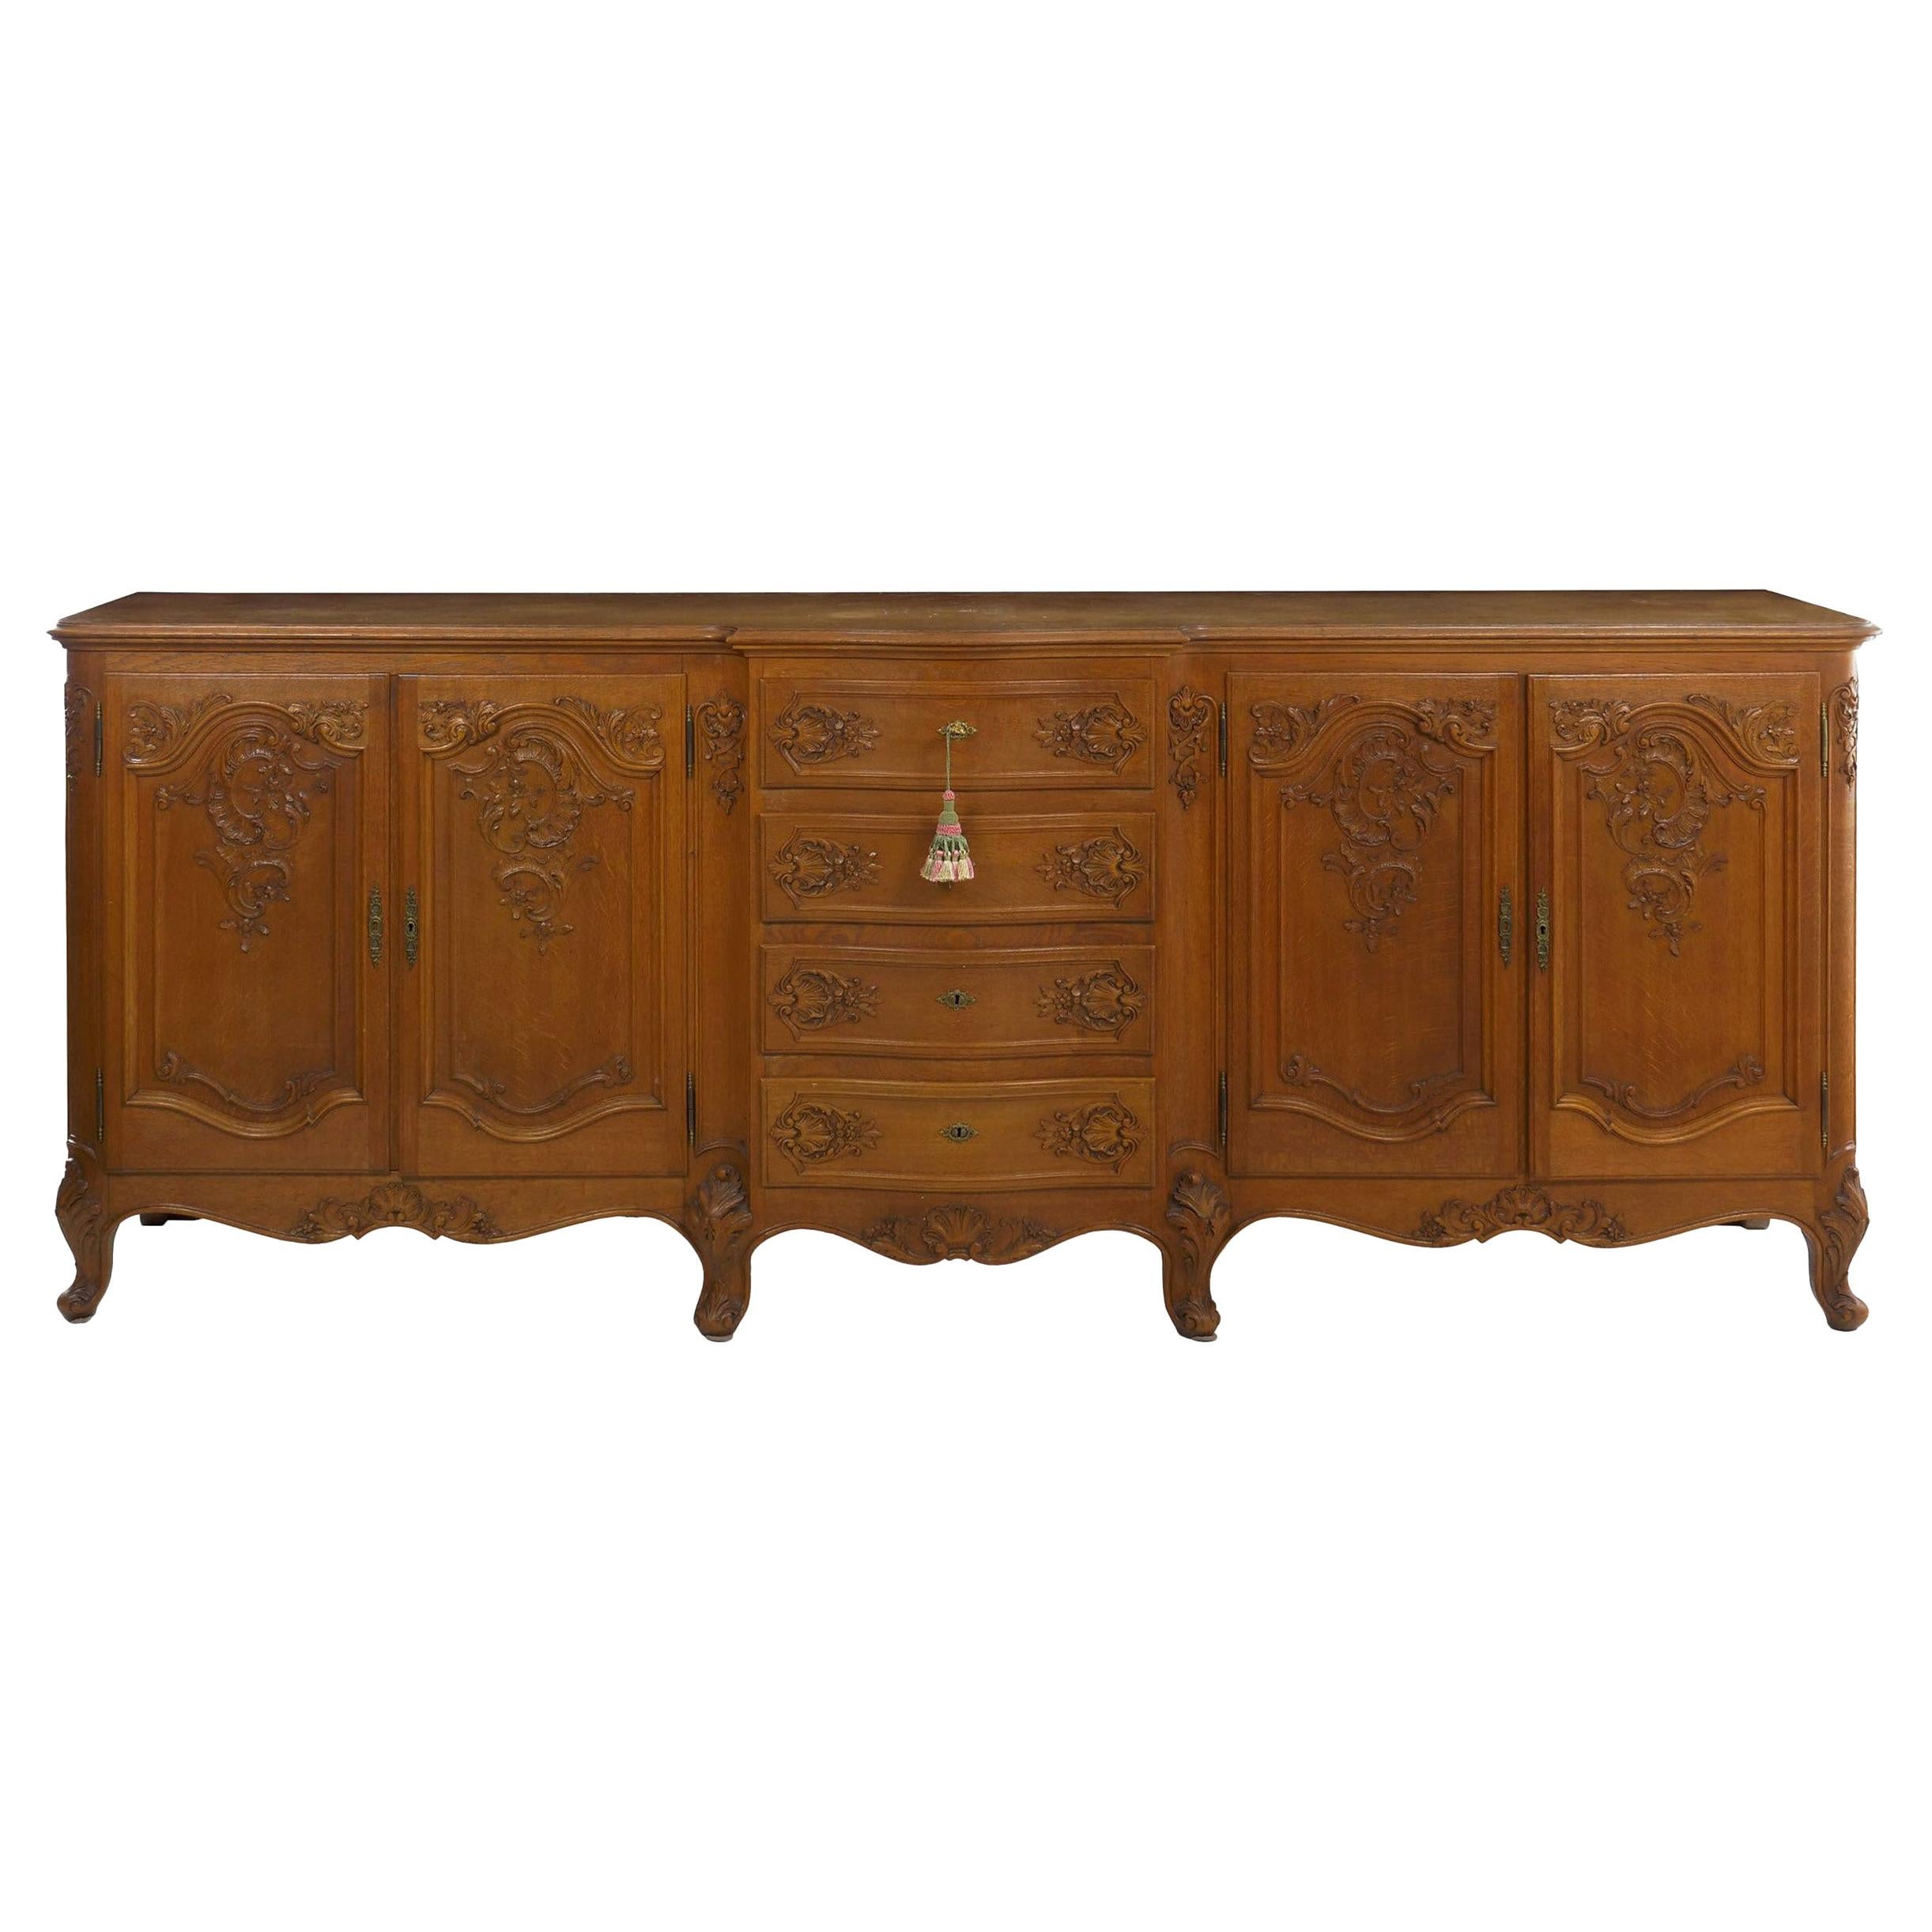 French Provincial Antique Carved Oak Buffet Server Sideboard, 19th Century